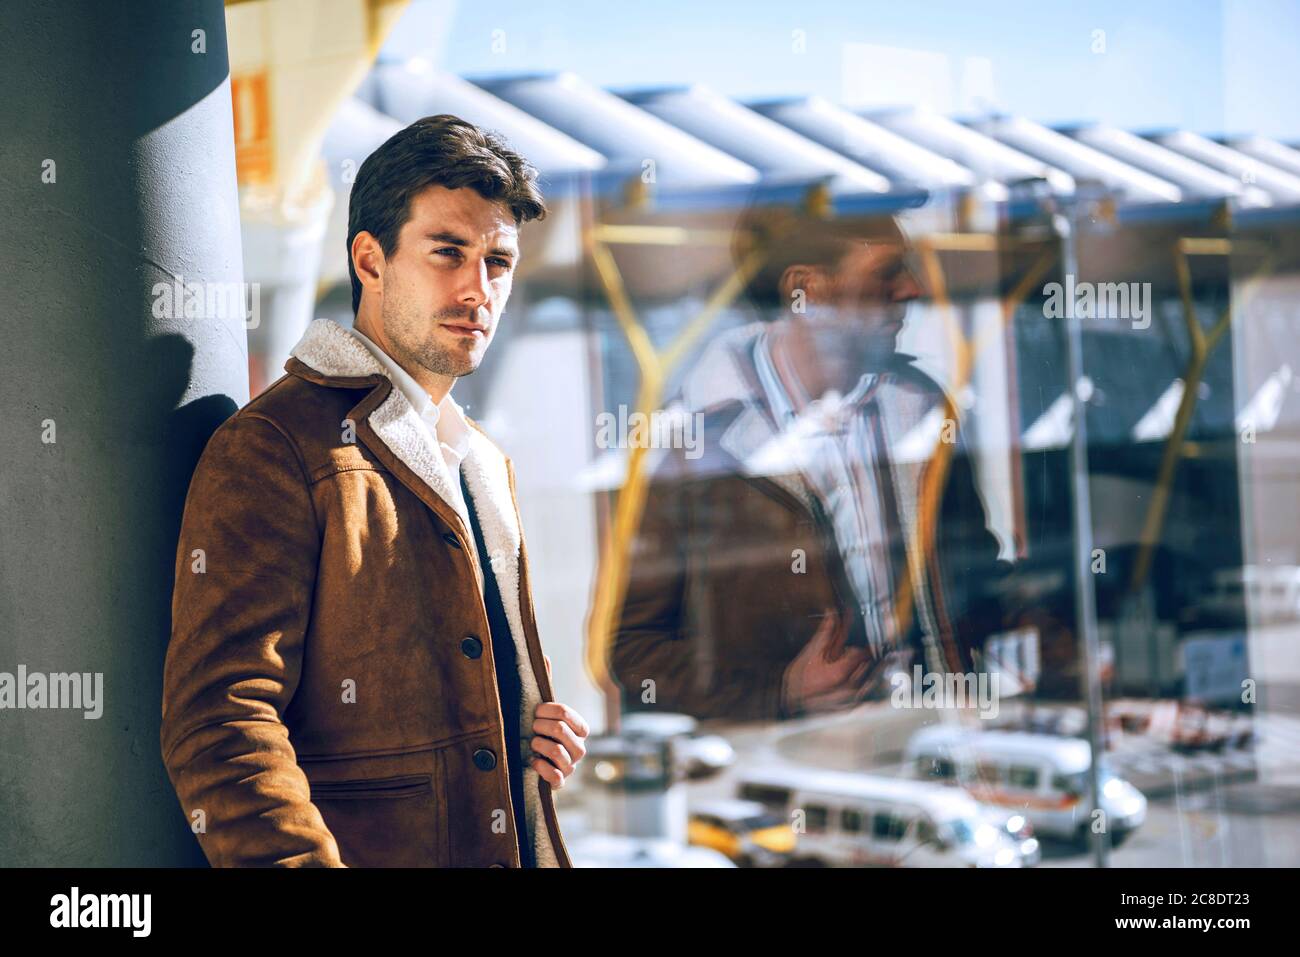 Thoughtful businessman standing by window at airport departure area Stock Photo